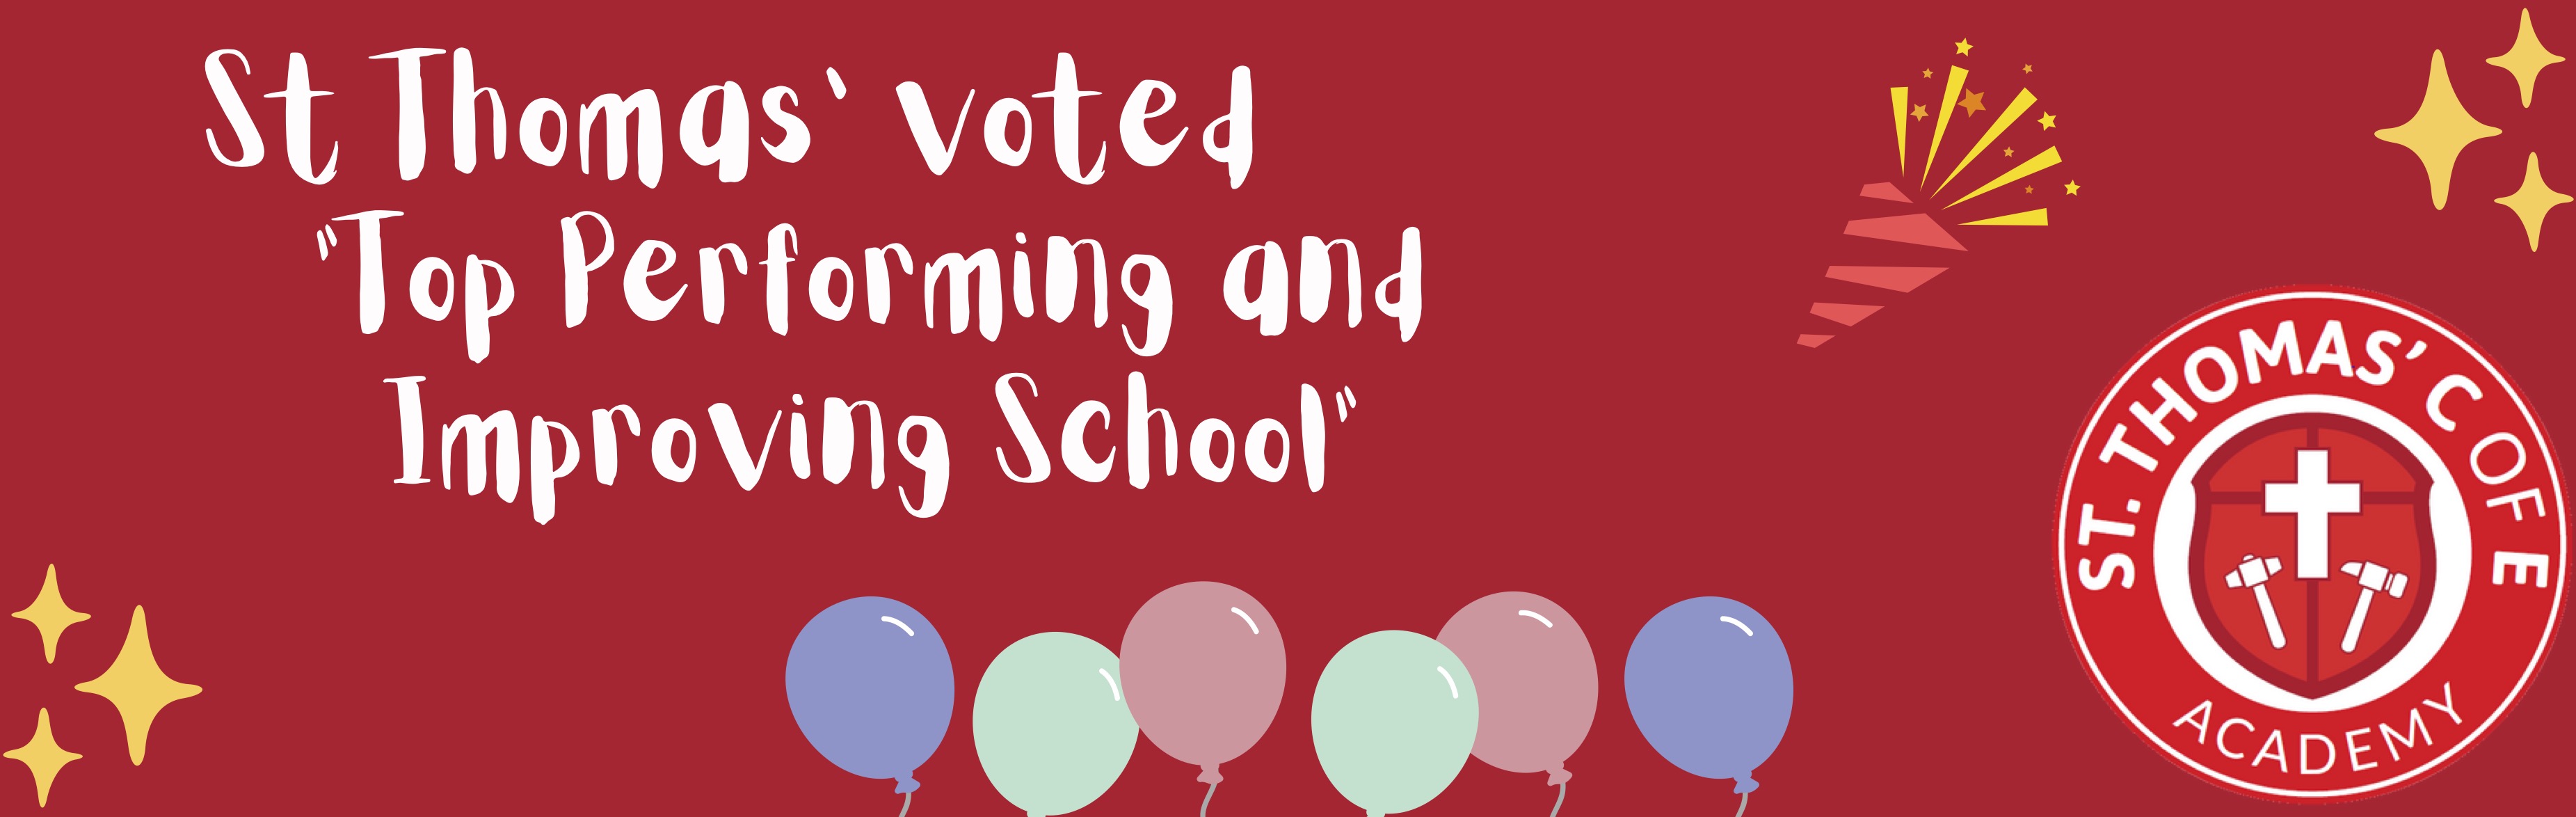 St Thomas' voted "Top Performing and Improving School 2023"!